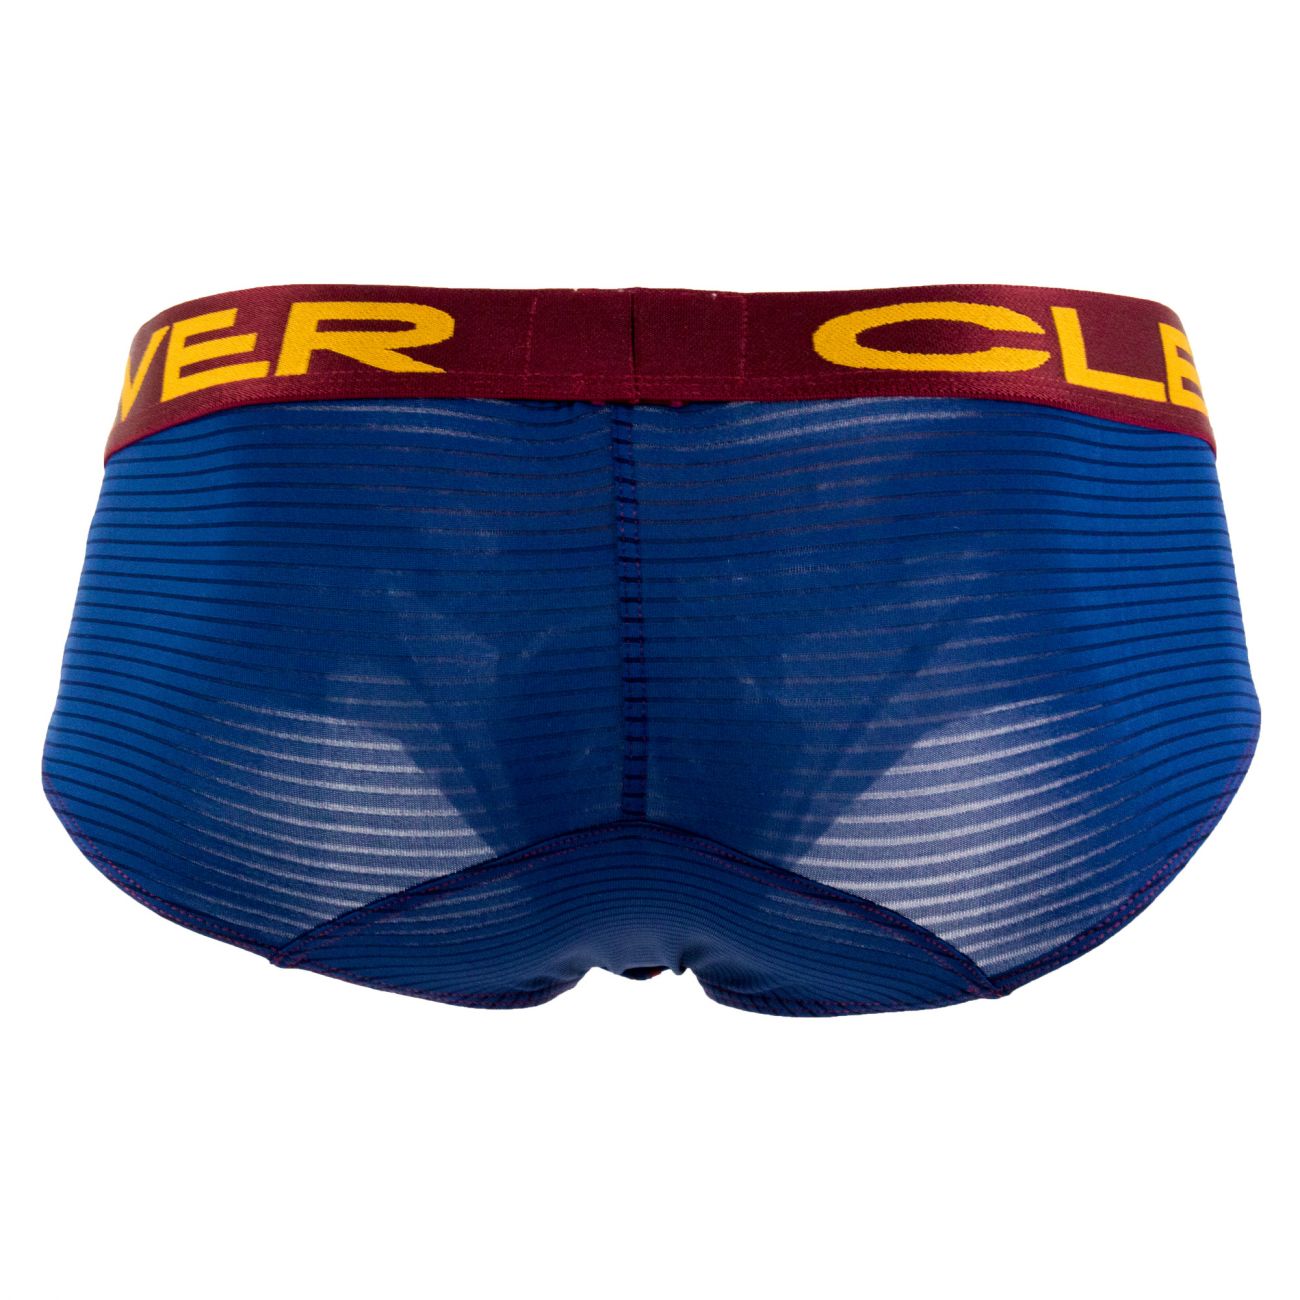 Clever 5355 Figaro Classic Briefs Blue